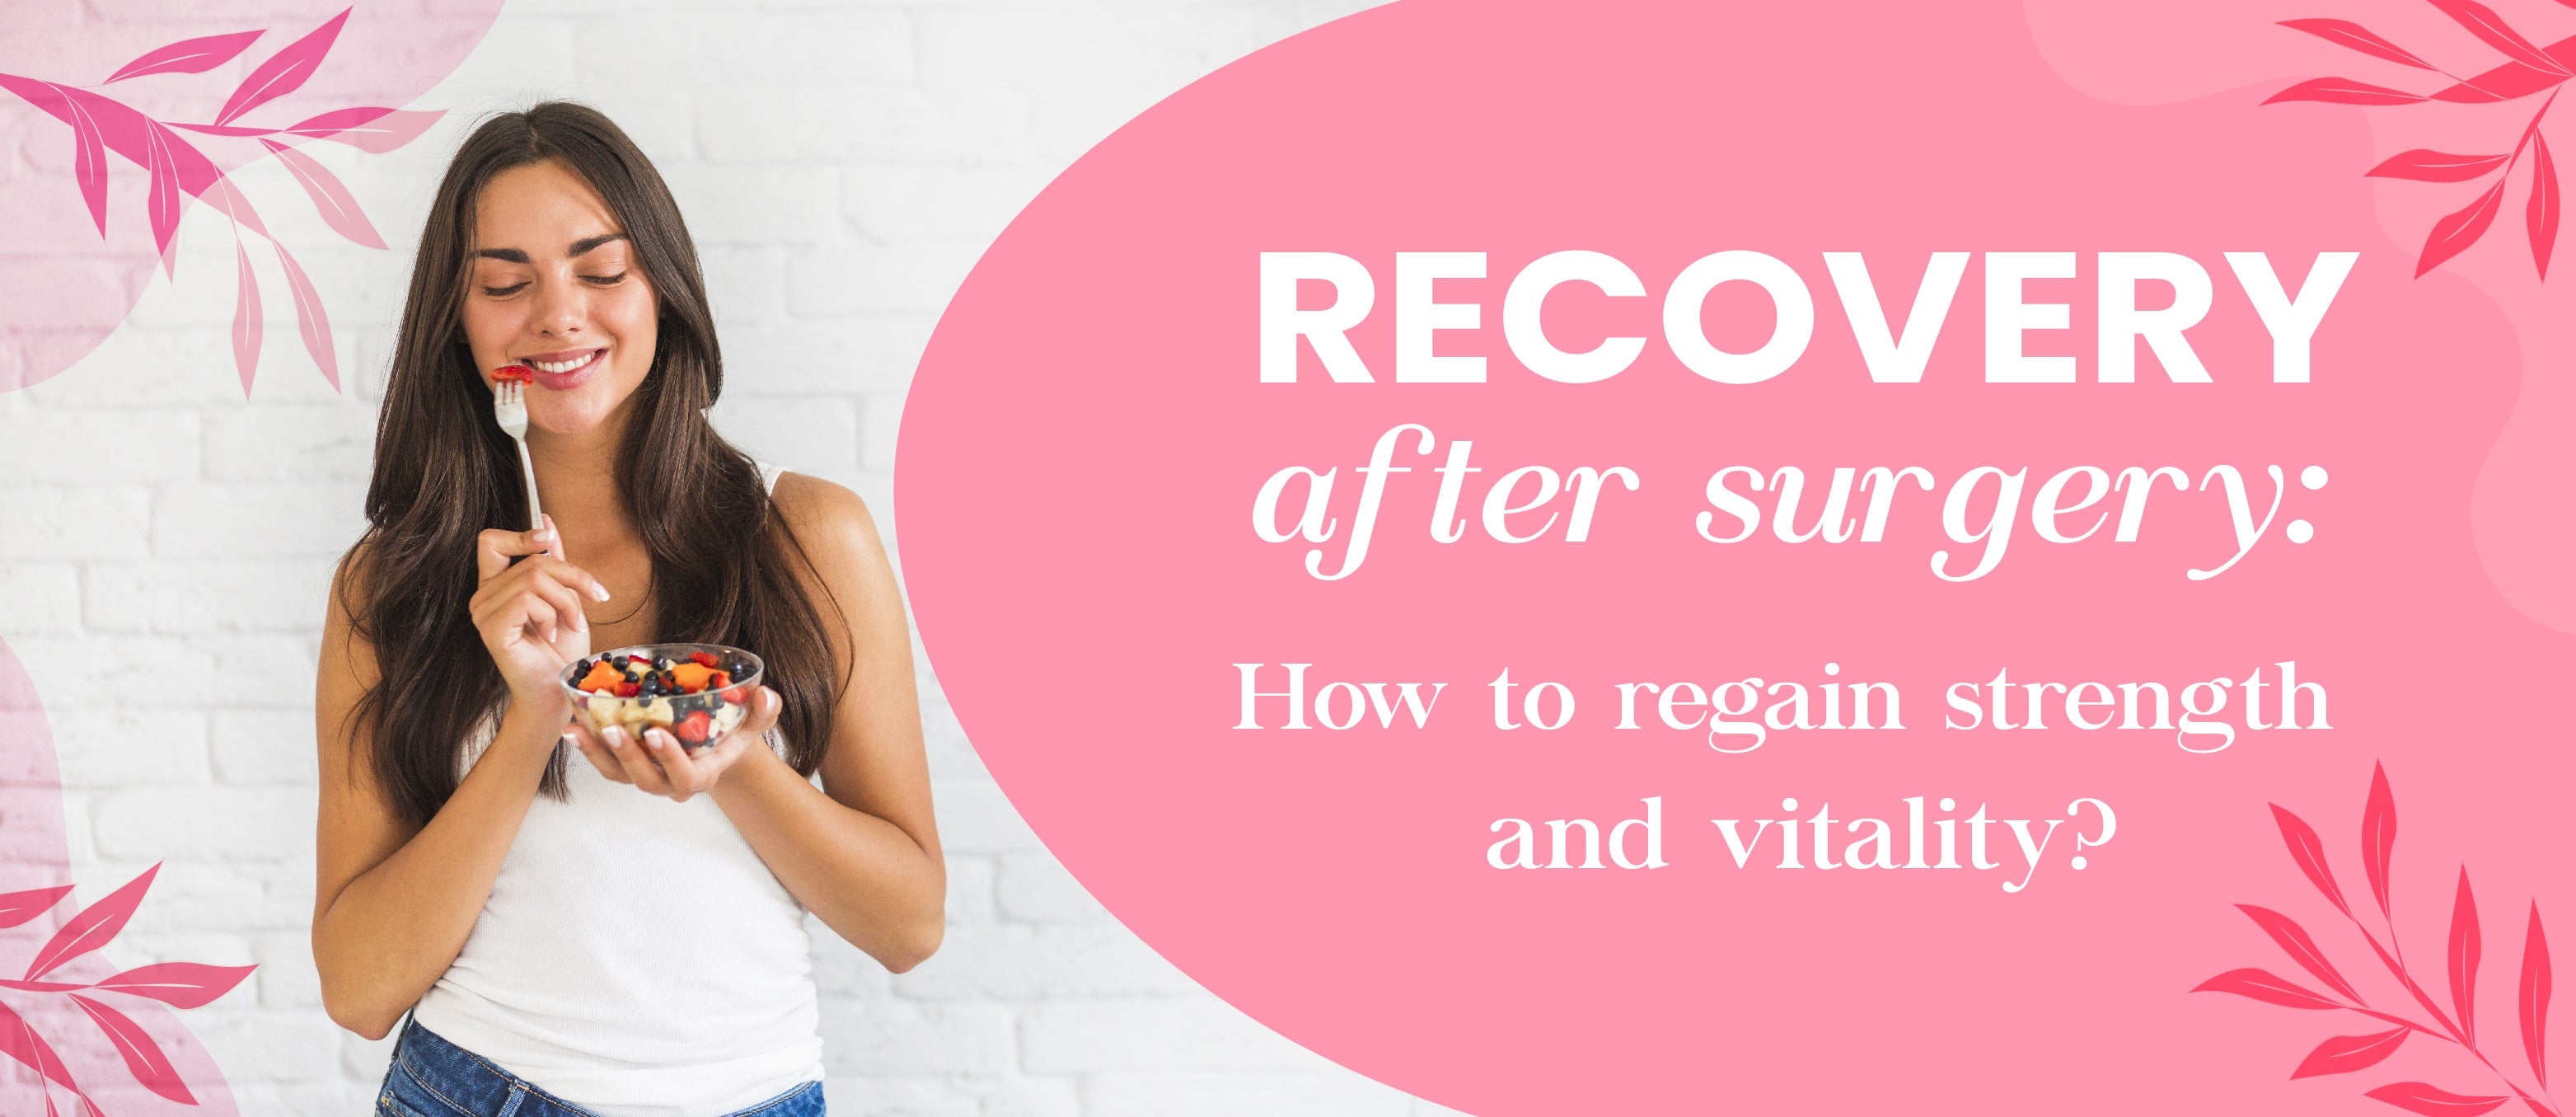 Recovery after surgery: How to regain strength and vitality?